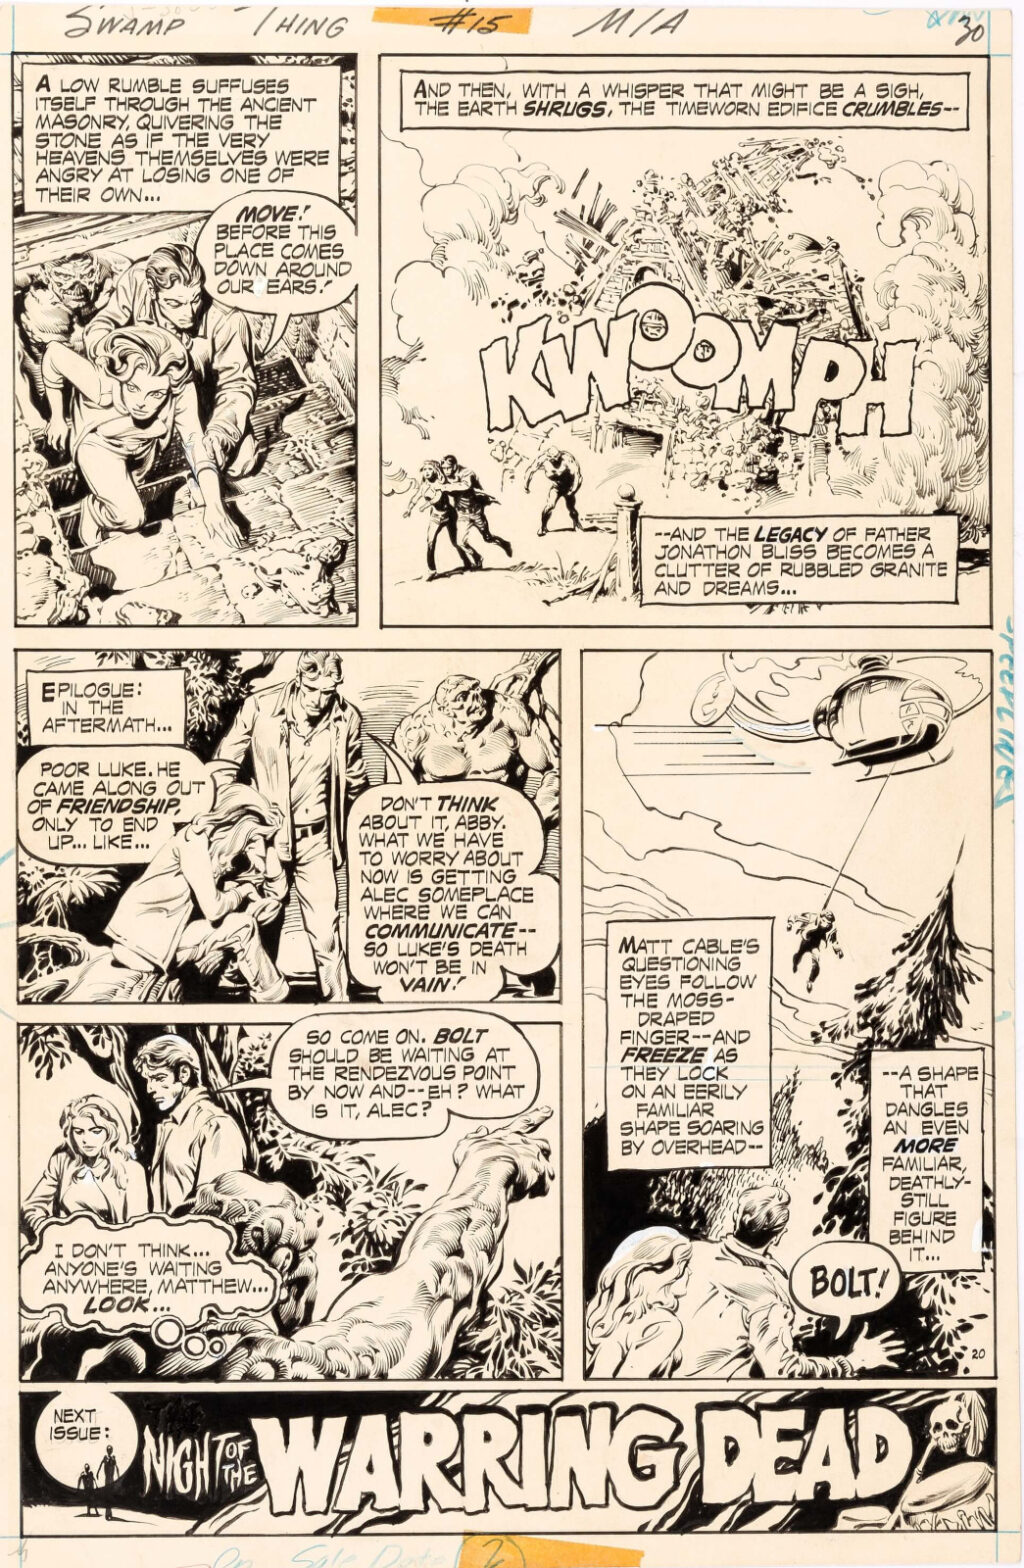 Swamp Thing issue 15 page 20 by Nestor Redondo